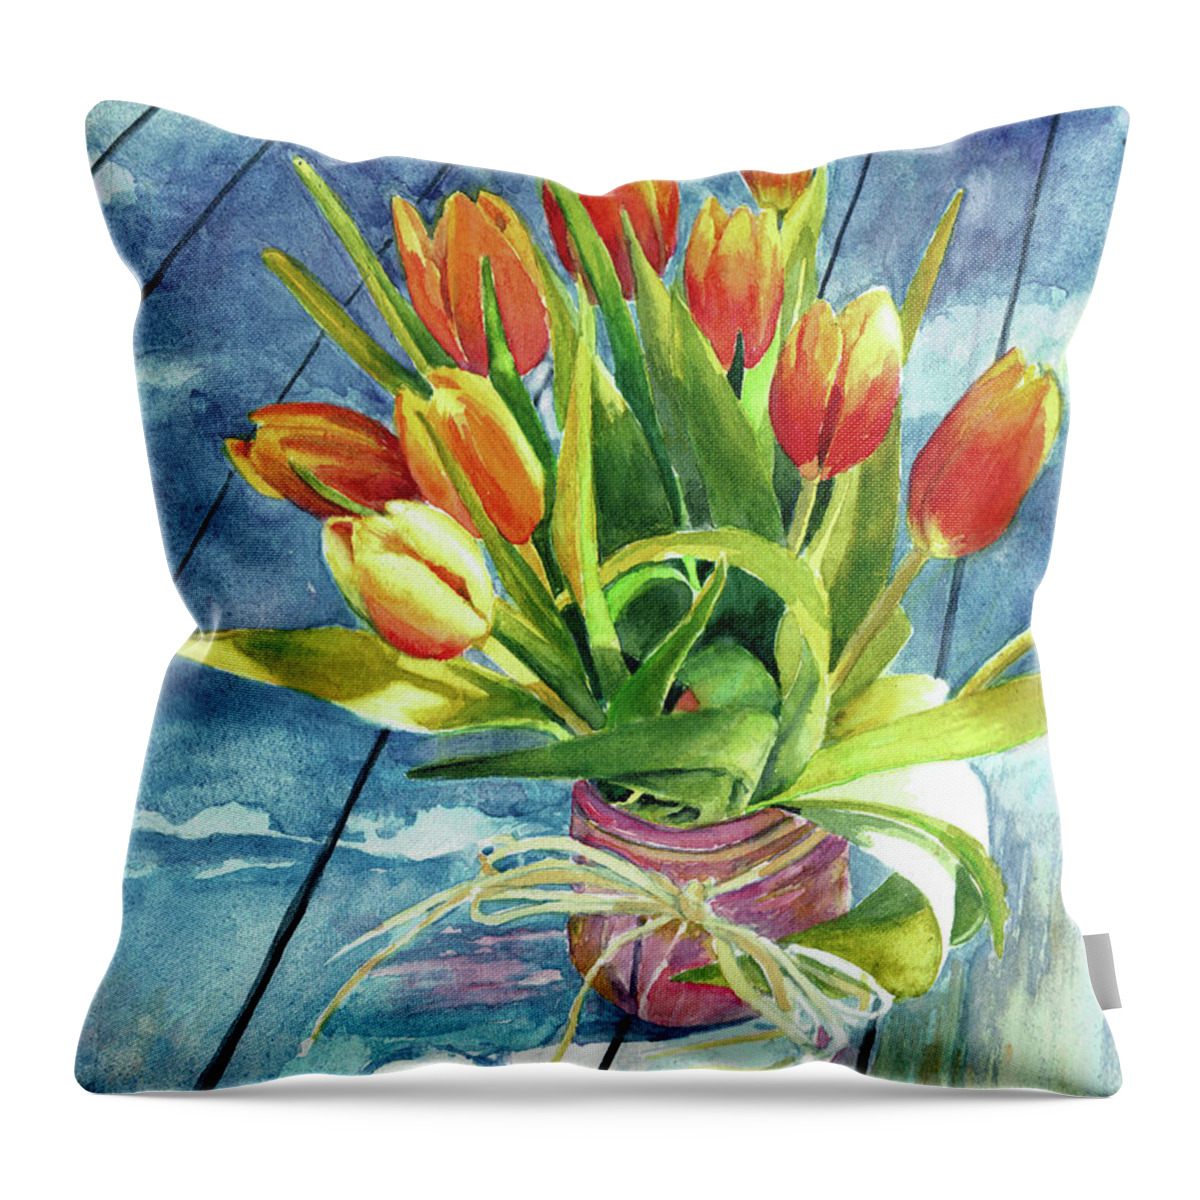 Floral Throw Pillow featuring the painting Mother's Day Bouquet by Susan Herbst